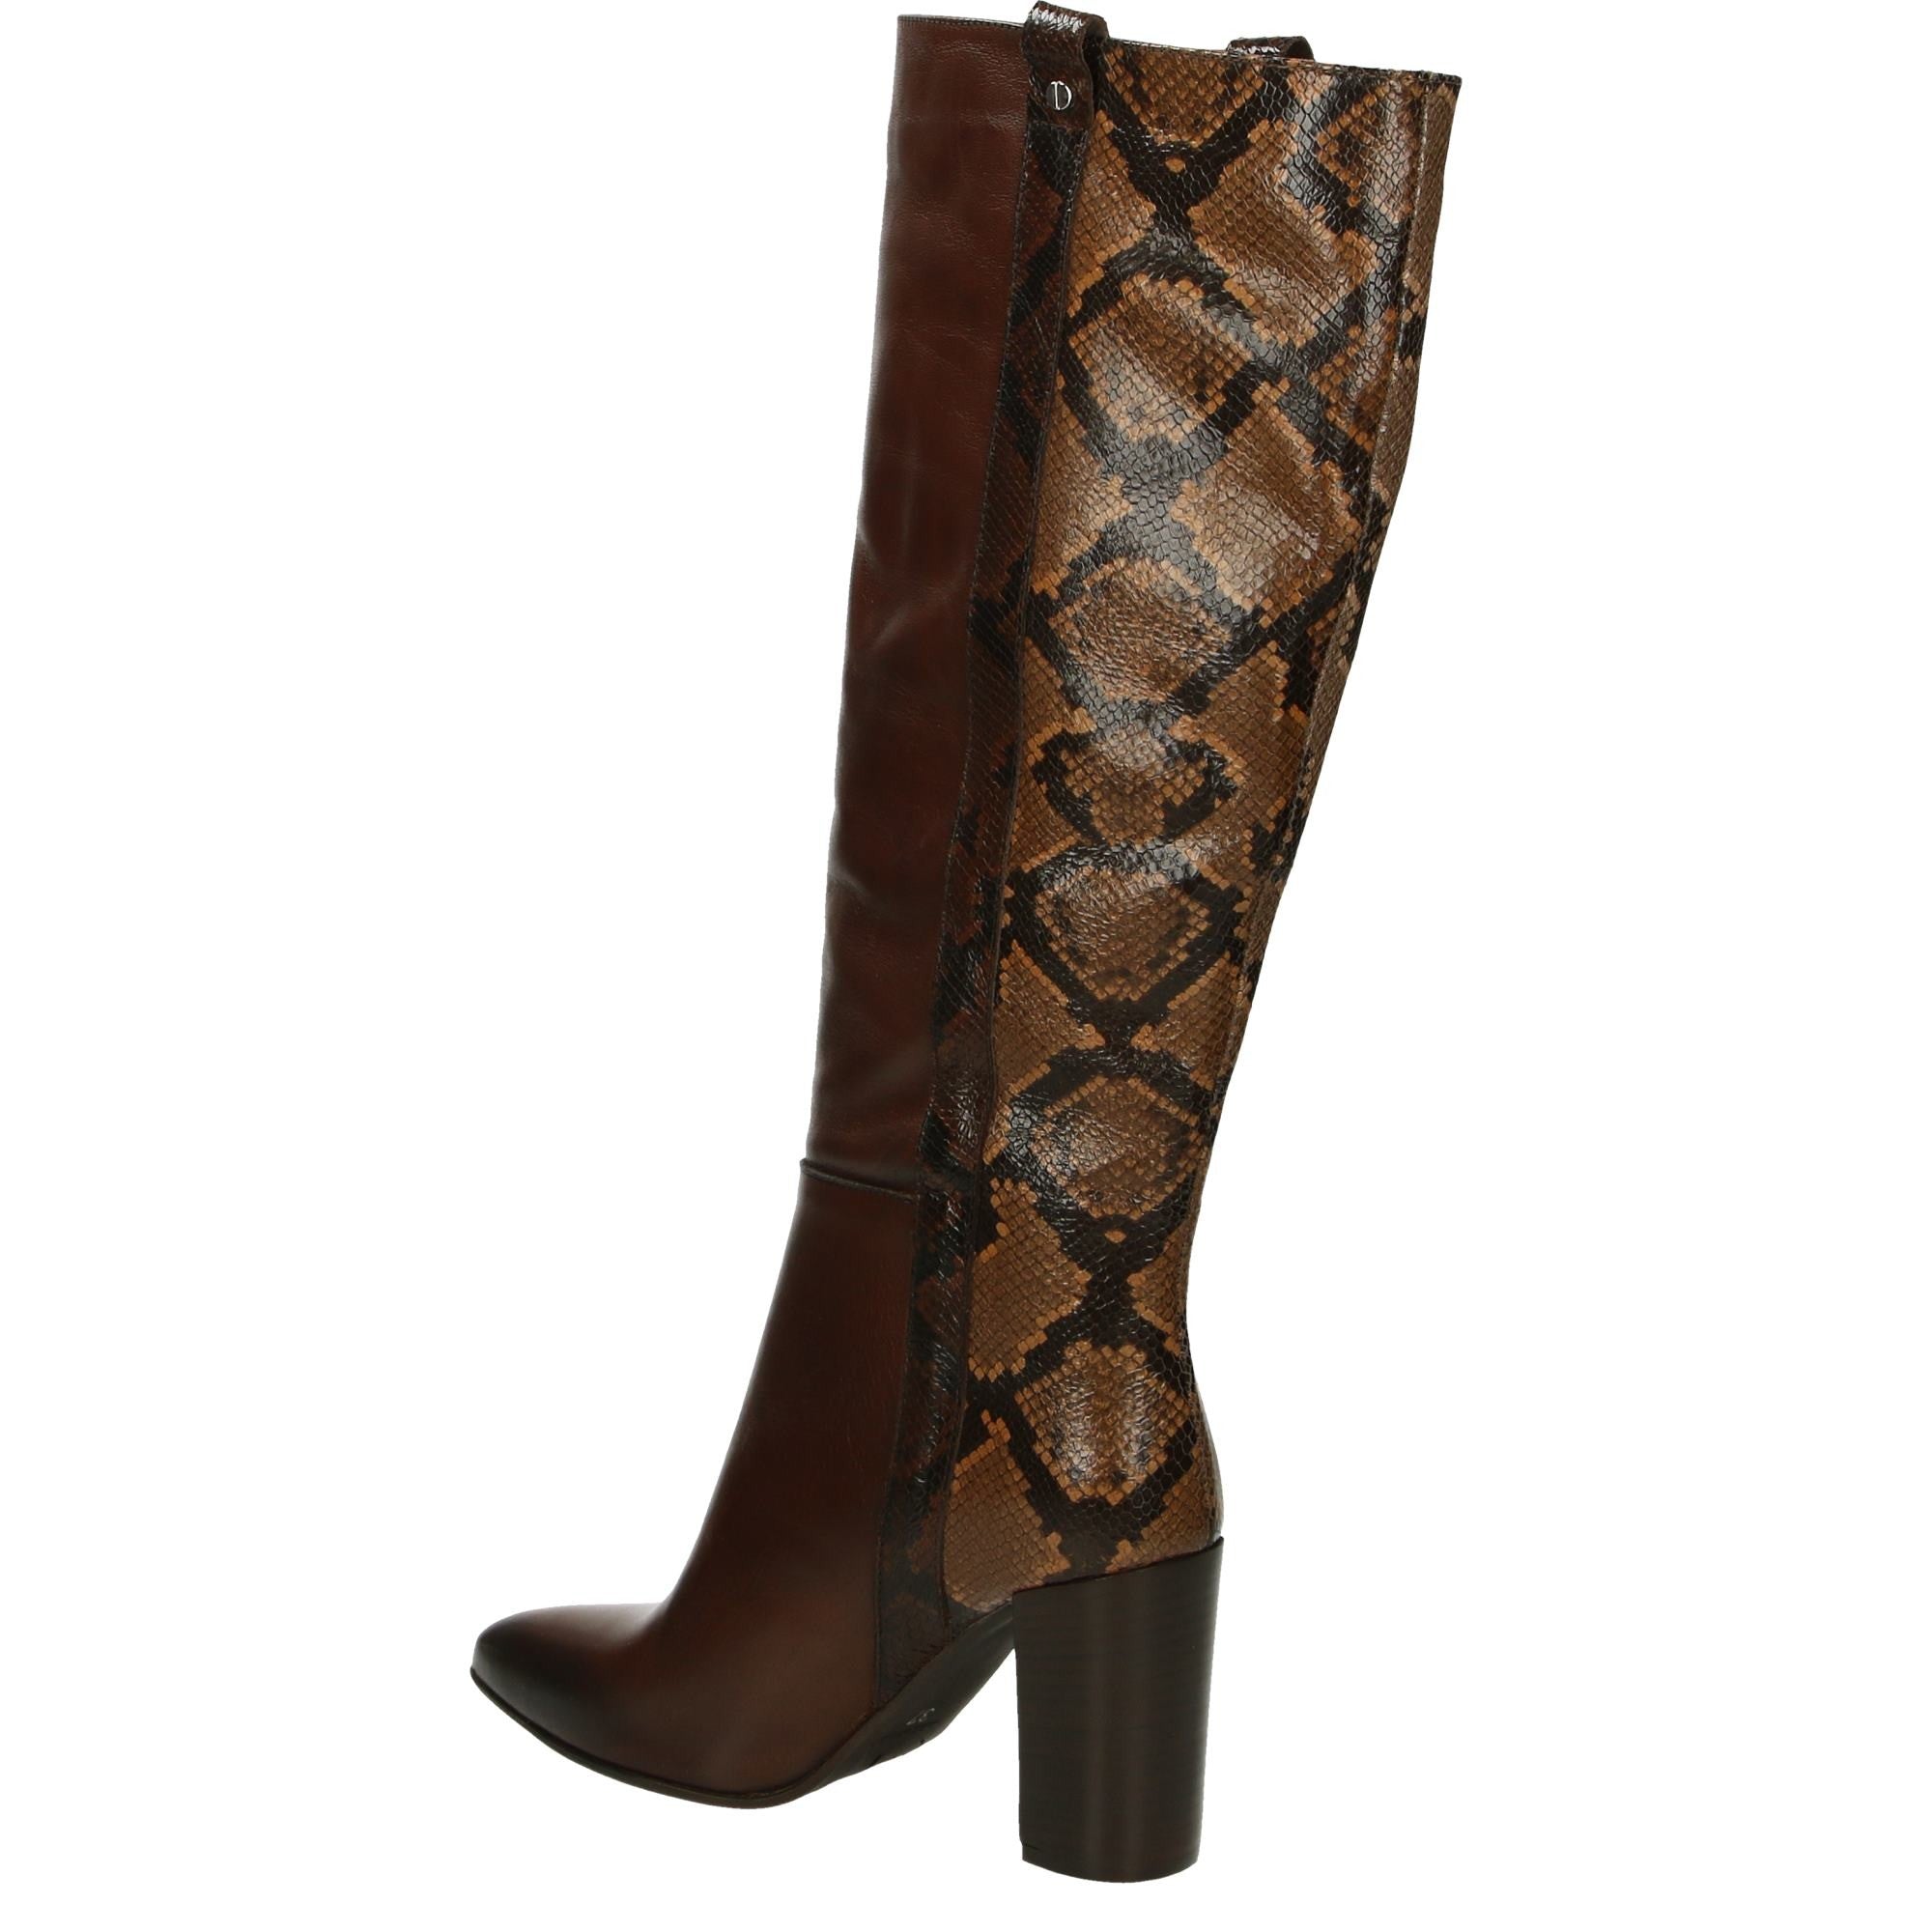 LONG BROWN BOOTS WITH SNAKESKIN PATTERN 